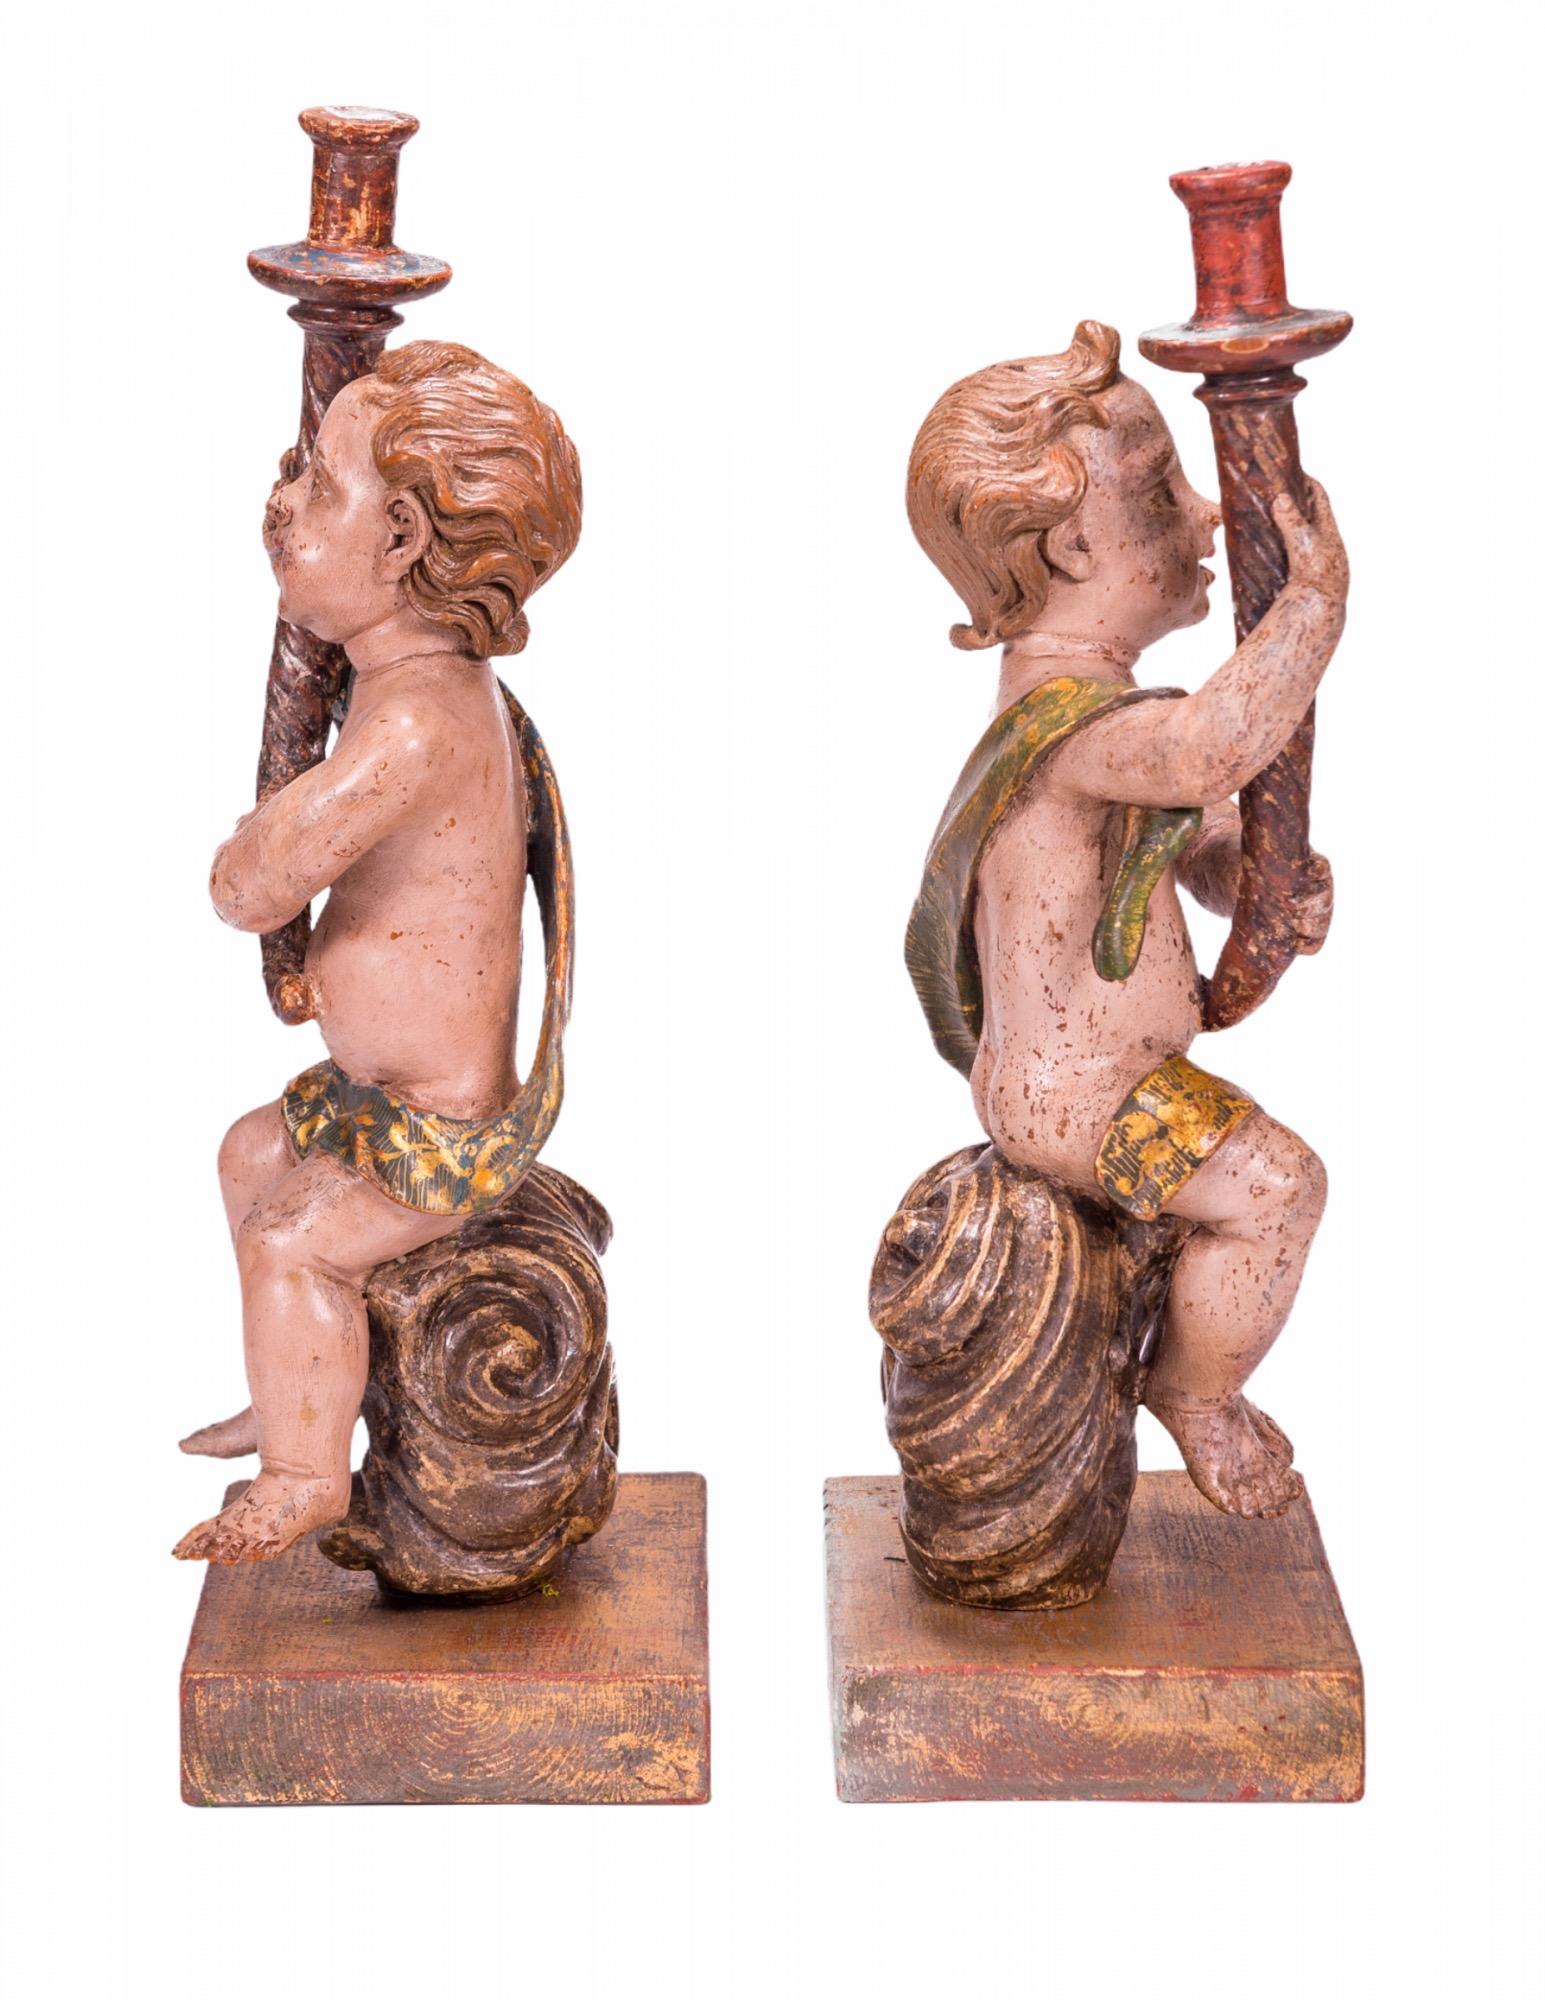 Italian Angel Sculptures with Torch Shaped Candleholders, 17th Century